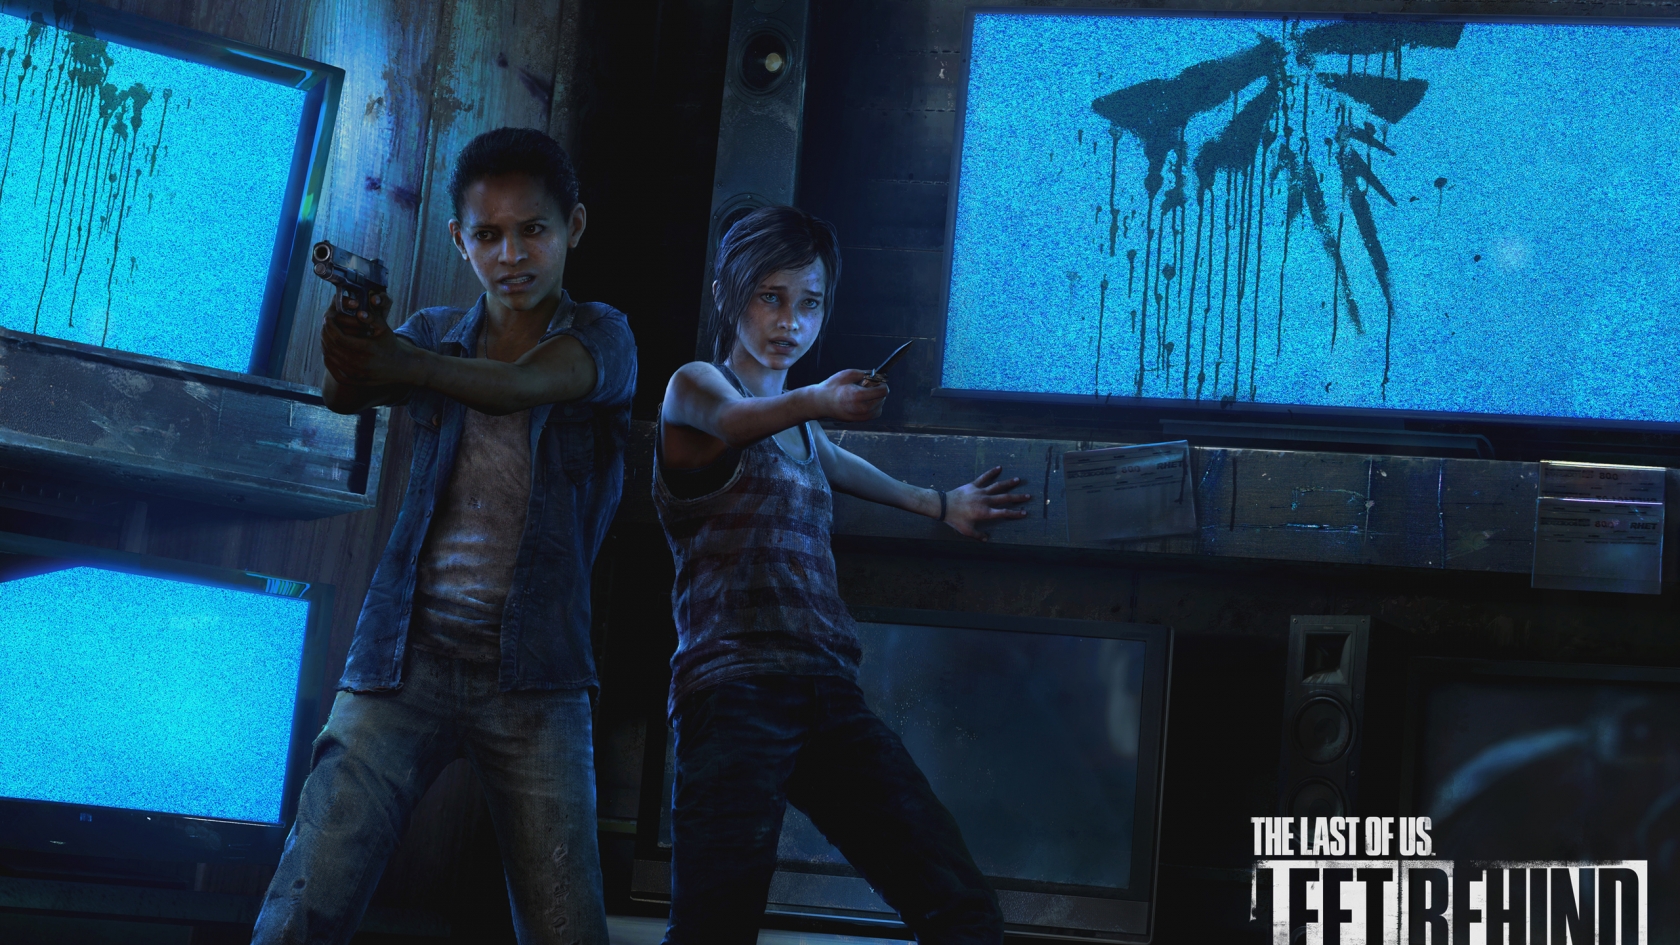 The Last Of Us Left Behind for 1680 x 945 HDTV resolution